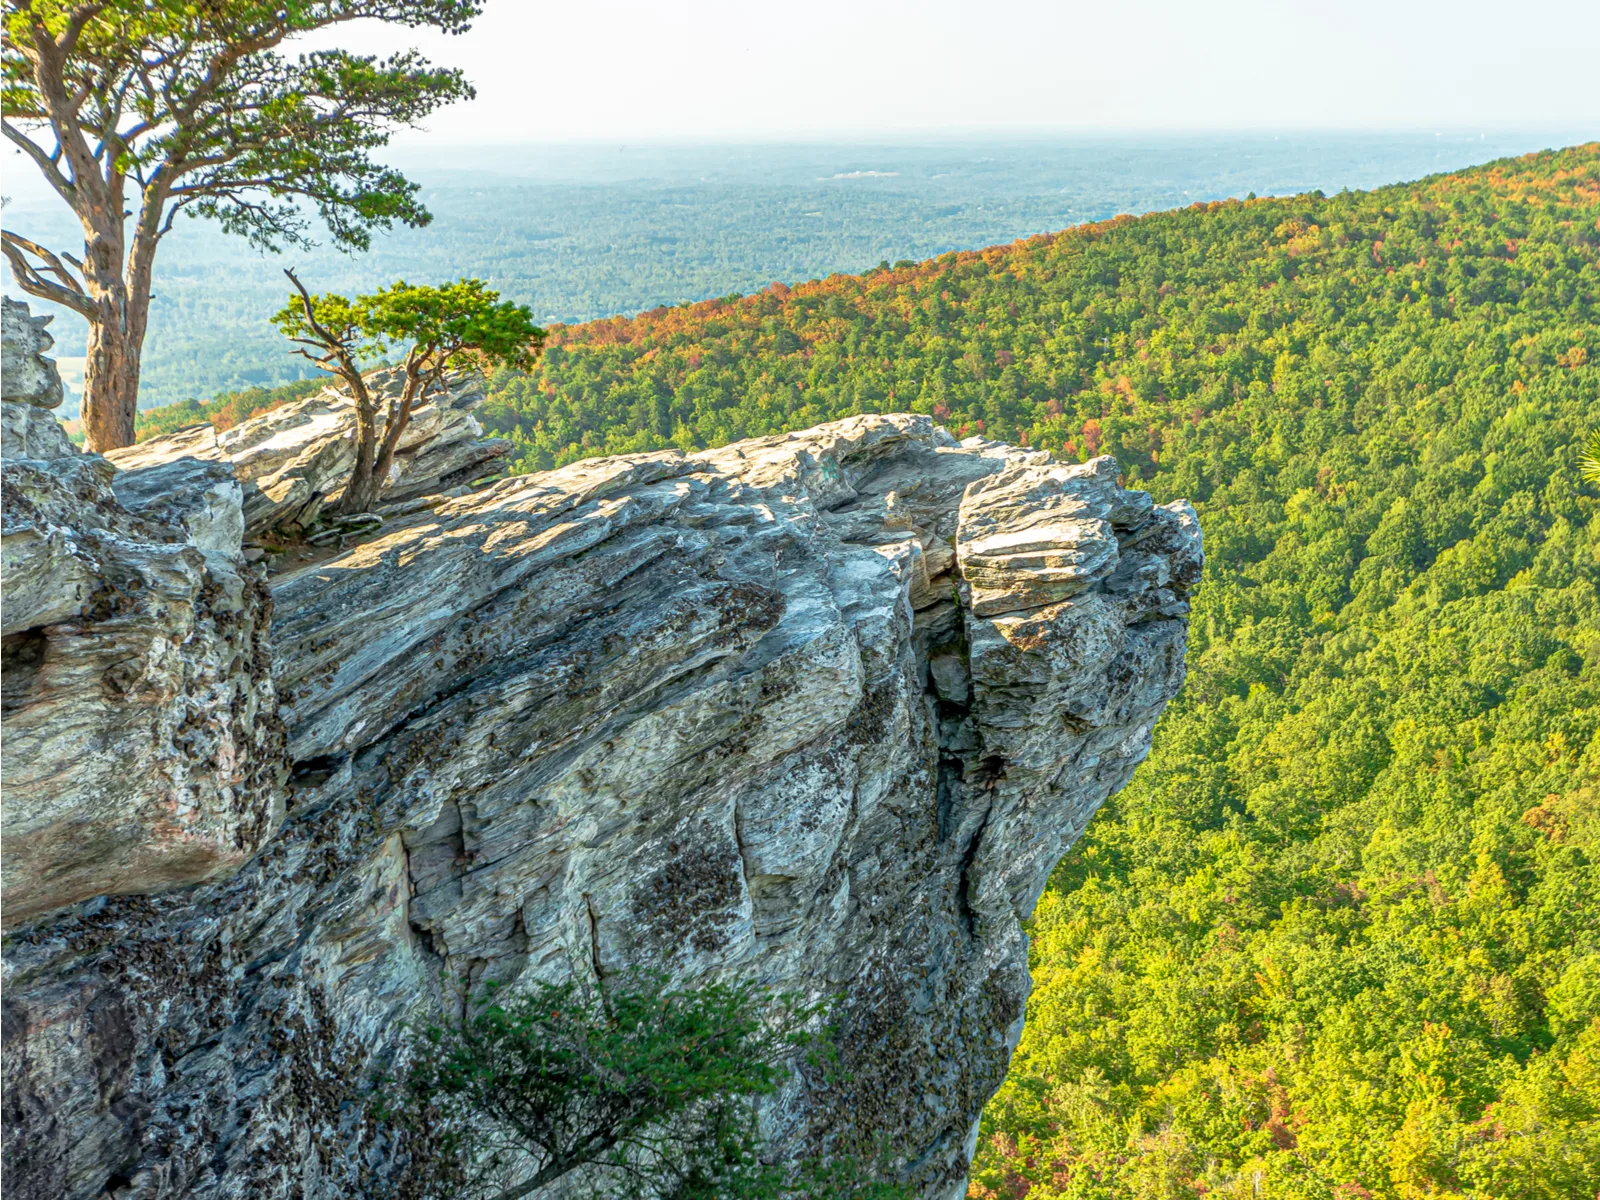 Peak view of Hanging Rock State Park, one of the best places to visit in North Carolina, in the Summer with a light green forest below